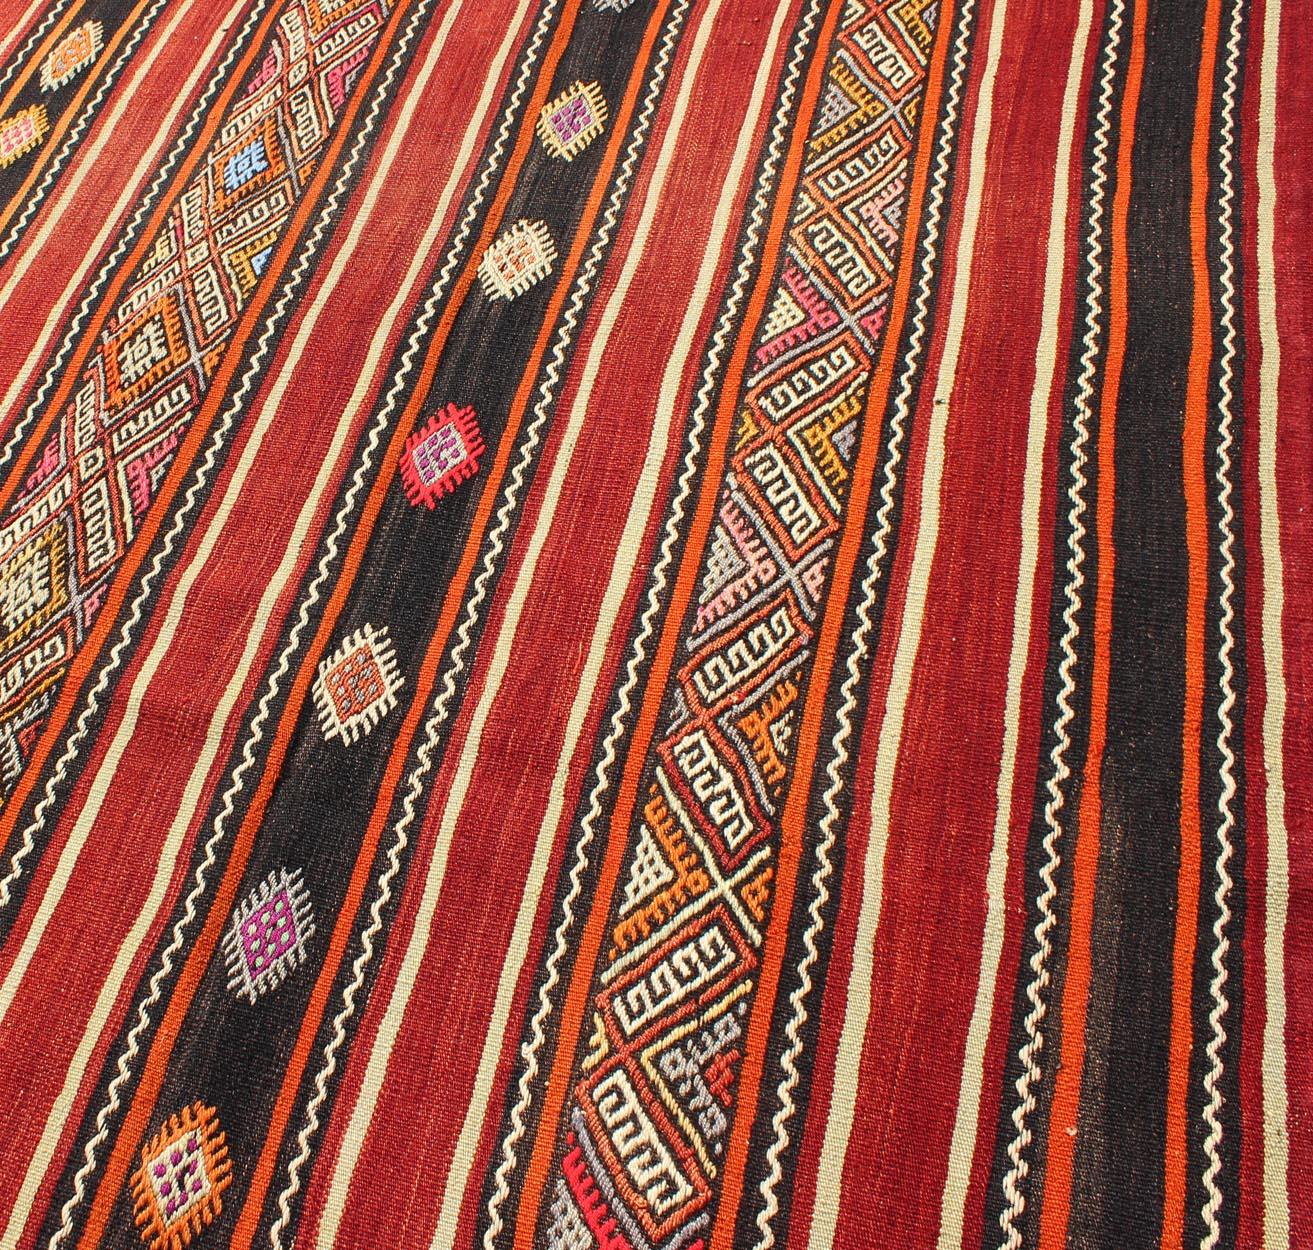 20th Century Red and Black Vintage Turkish Embroidered Flat Weave in Modern Striped Design For Sale